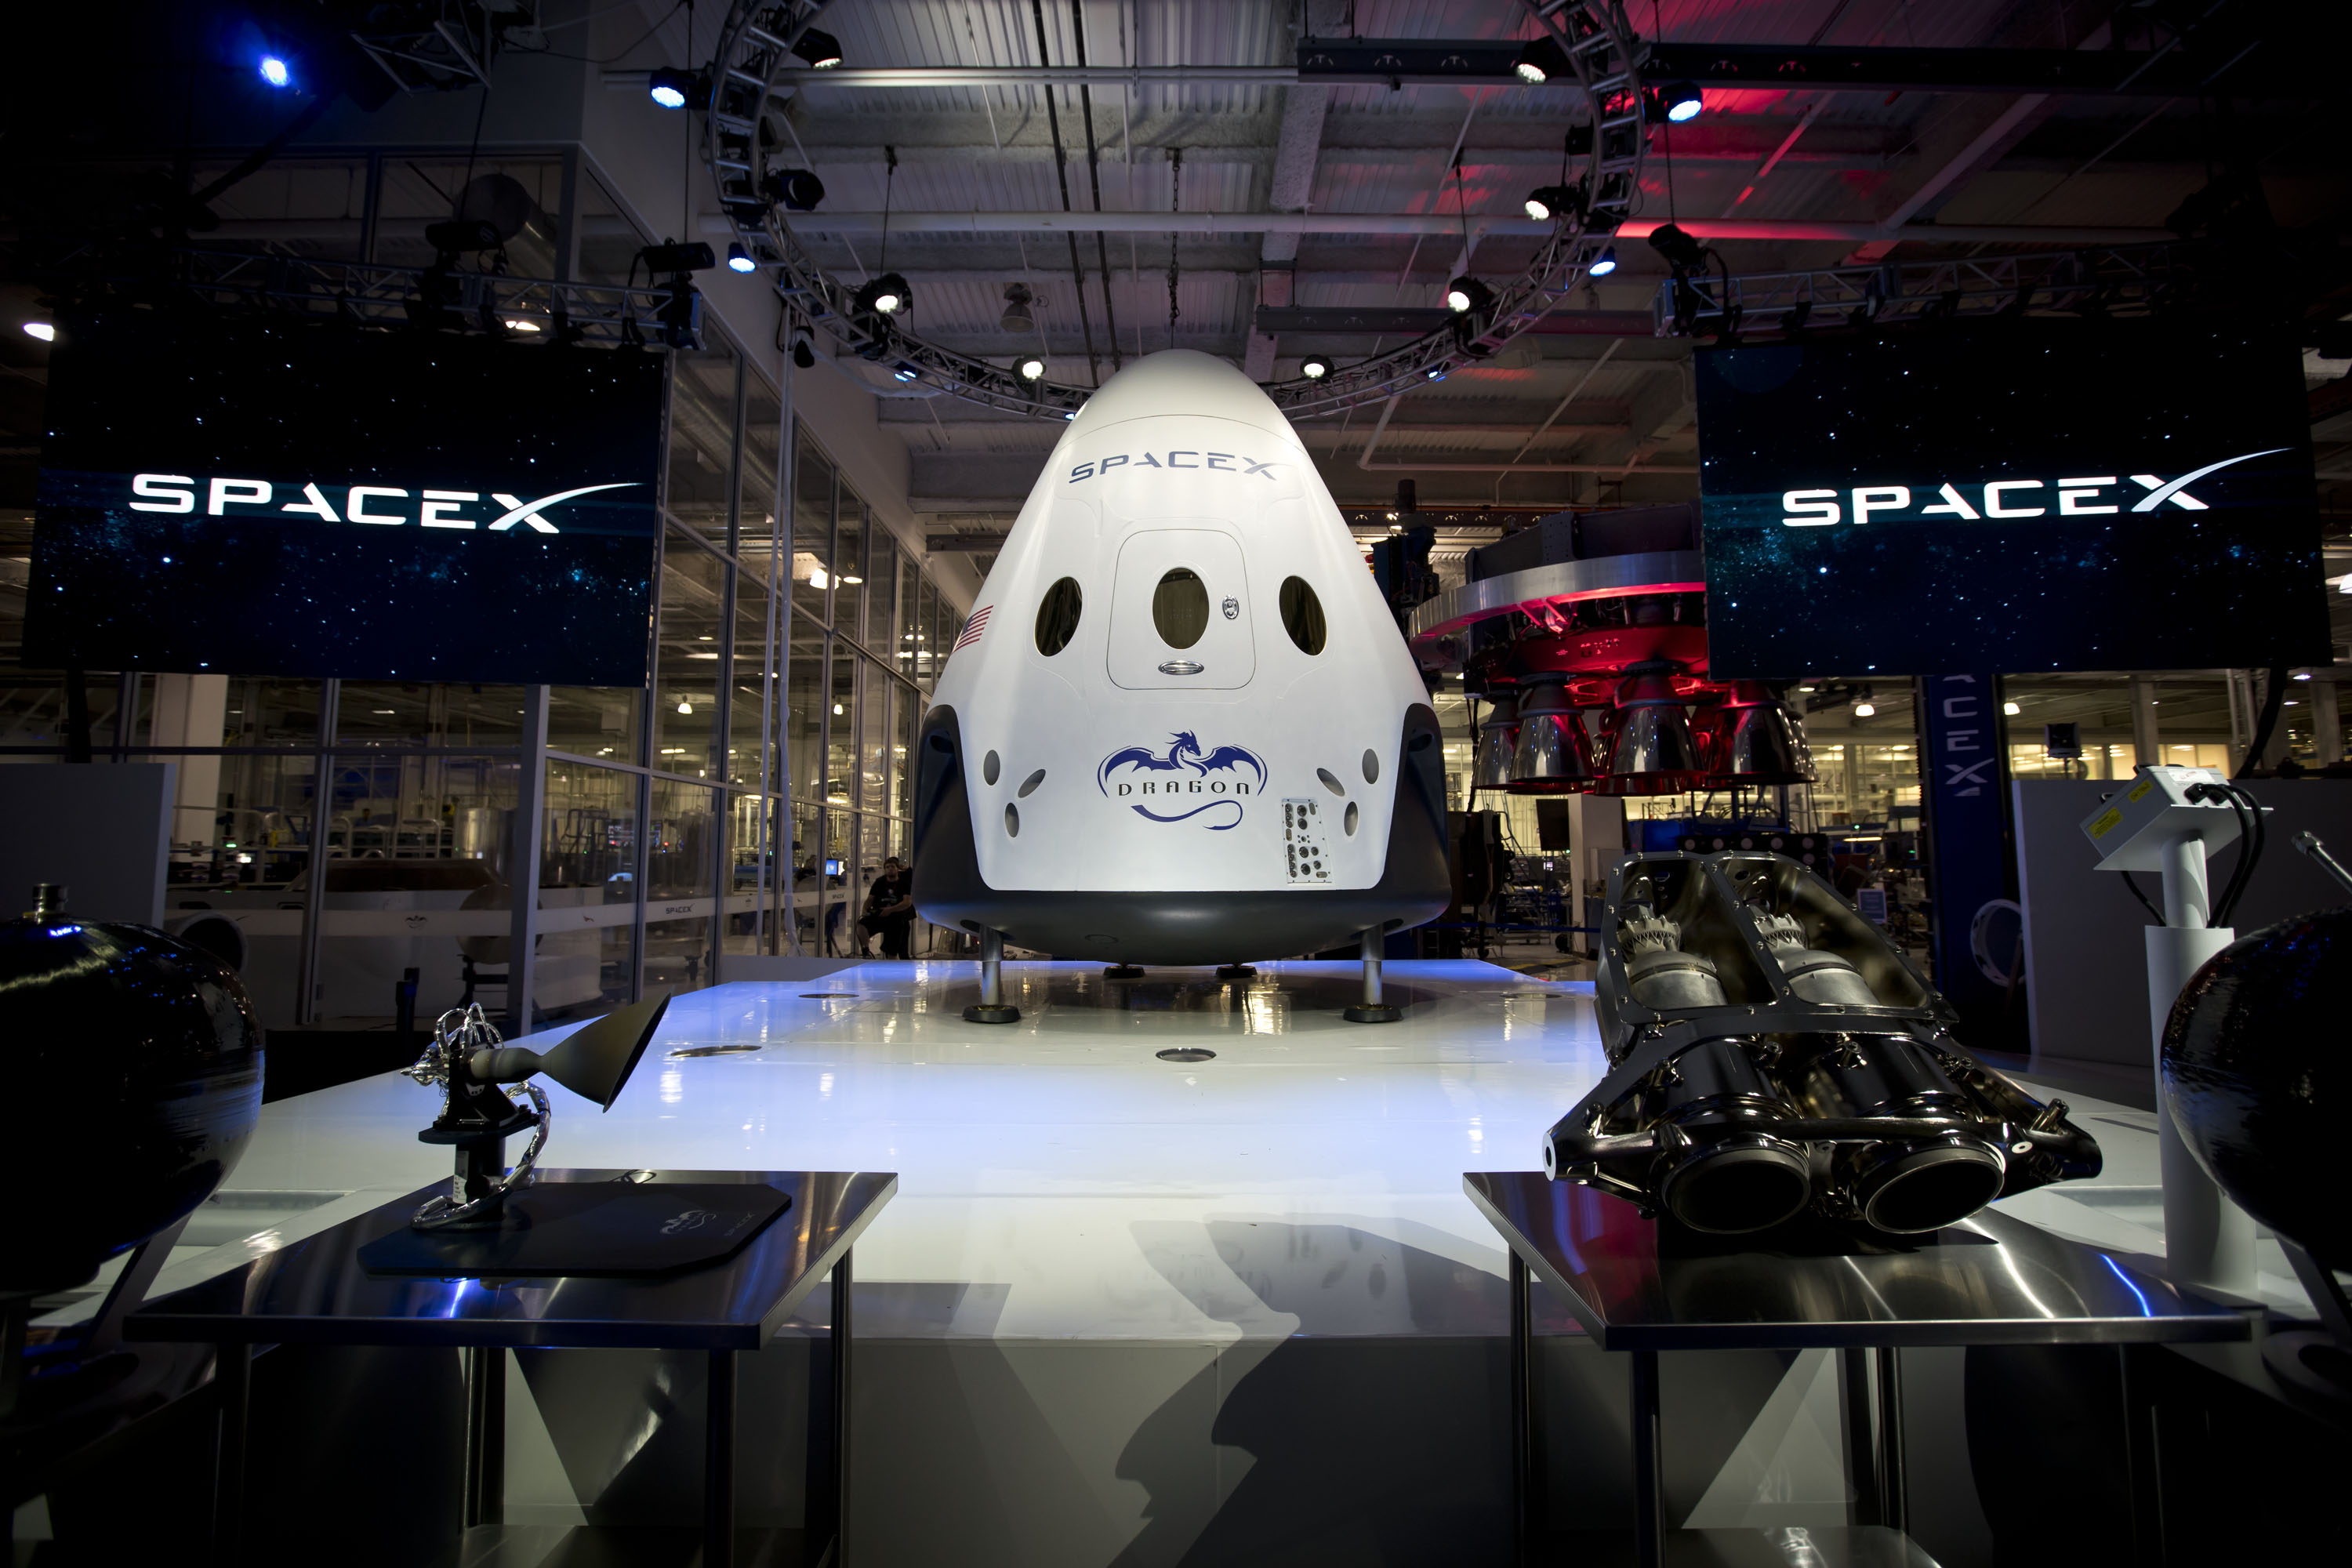 On May 29, 2014, SpaceX's CEO Elon Musk (not pictured) unveiled the company's first manned spacecraft, Dragon V2, at a press conference in Hawthorne, Calif., on May 29, 2014.